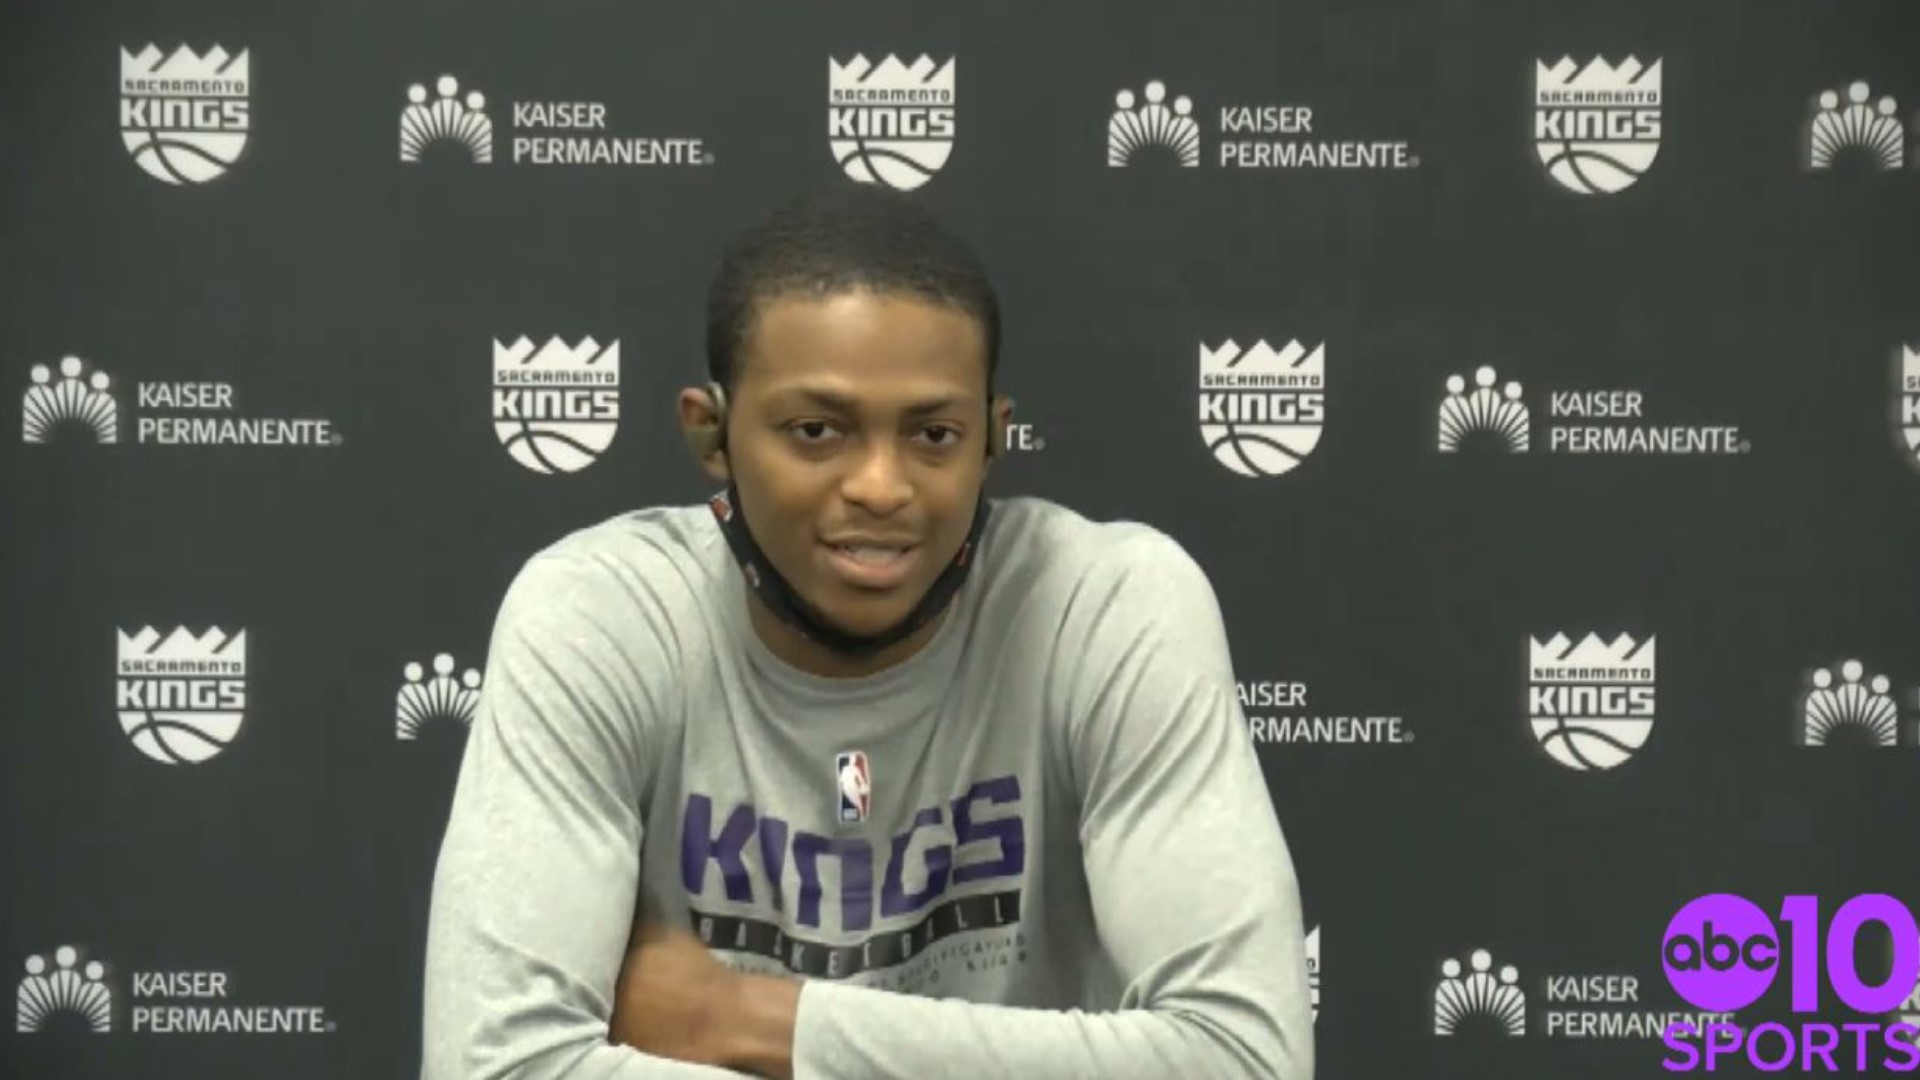 Following his 24 point performance on Saturday, Sacramento Kings point guard De’Aaron Fox discusses the 106-103 home opening win over the Phoenix Suns.